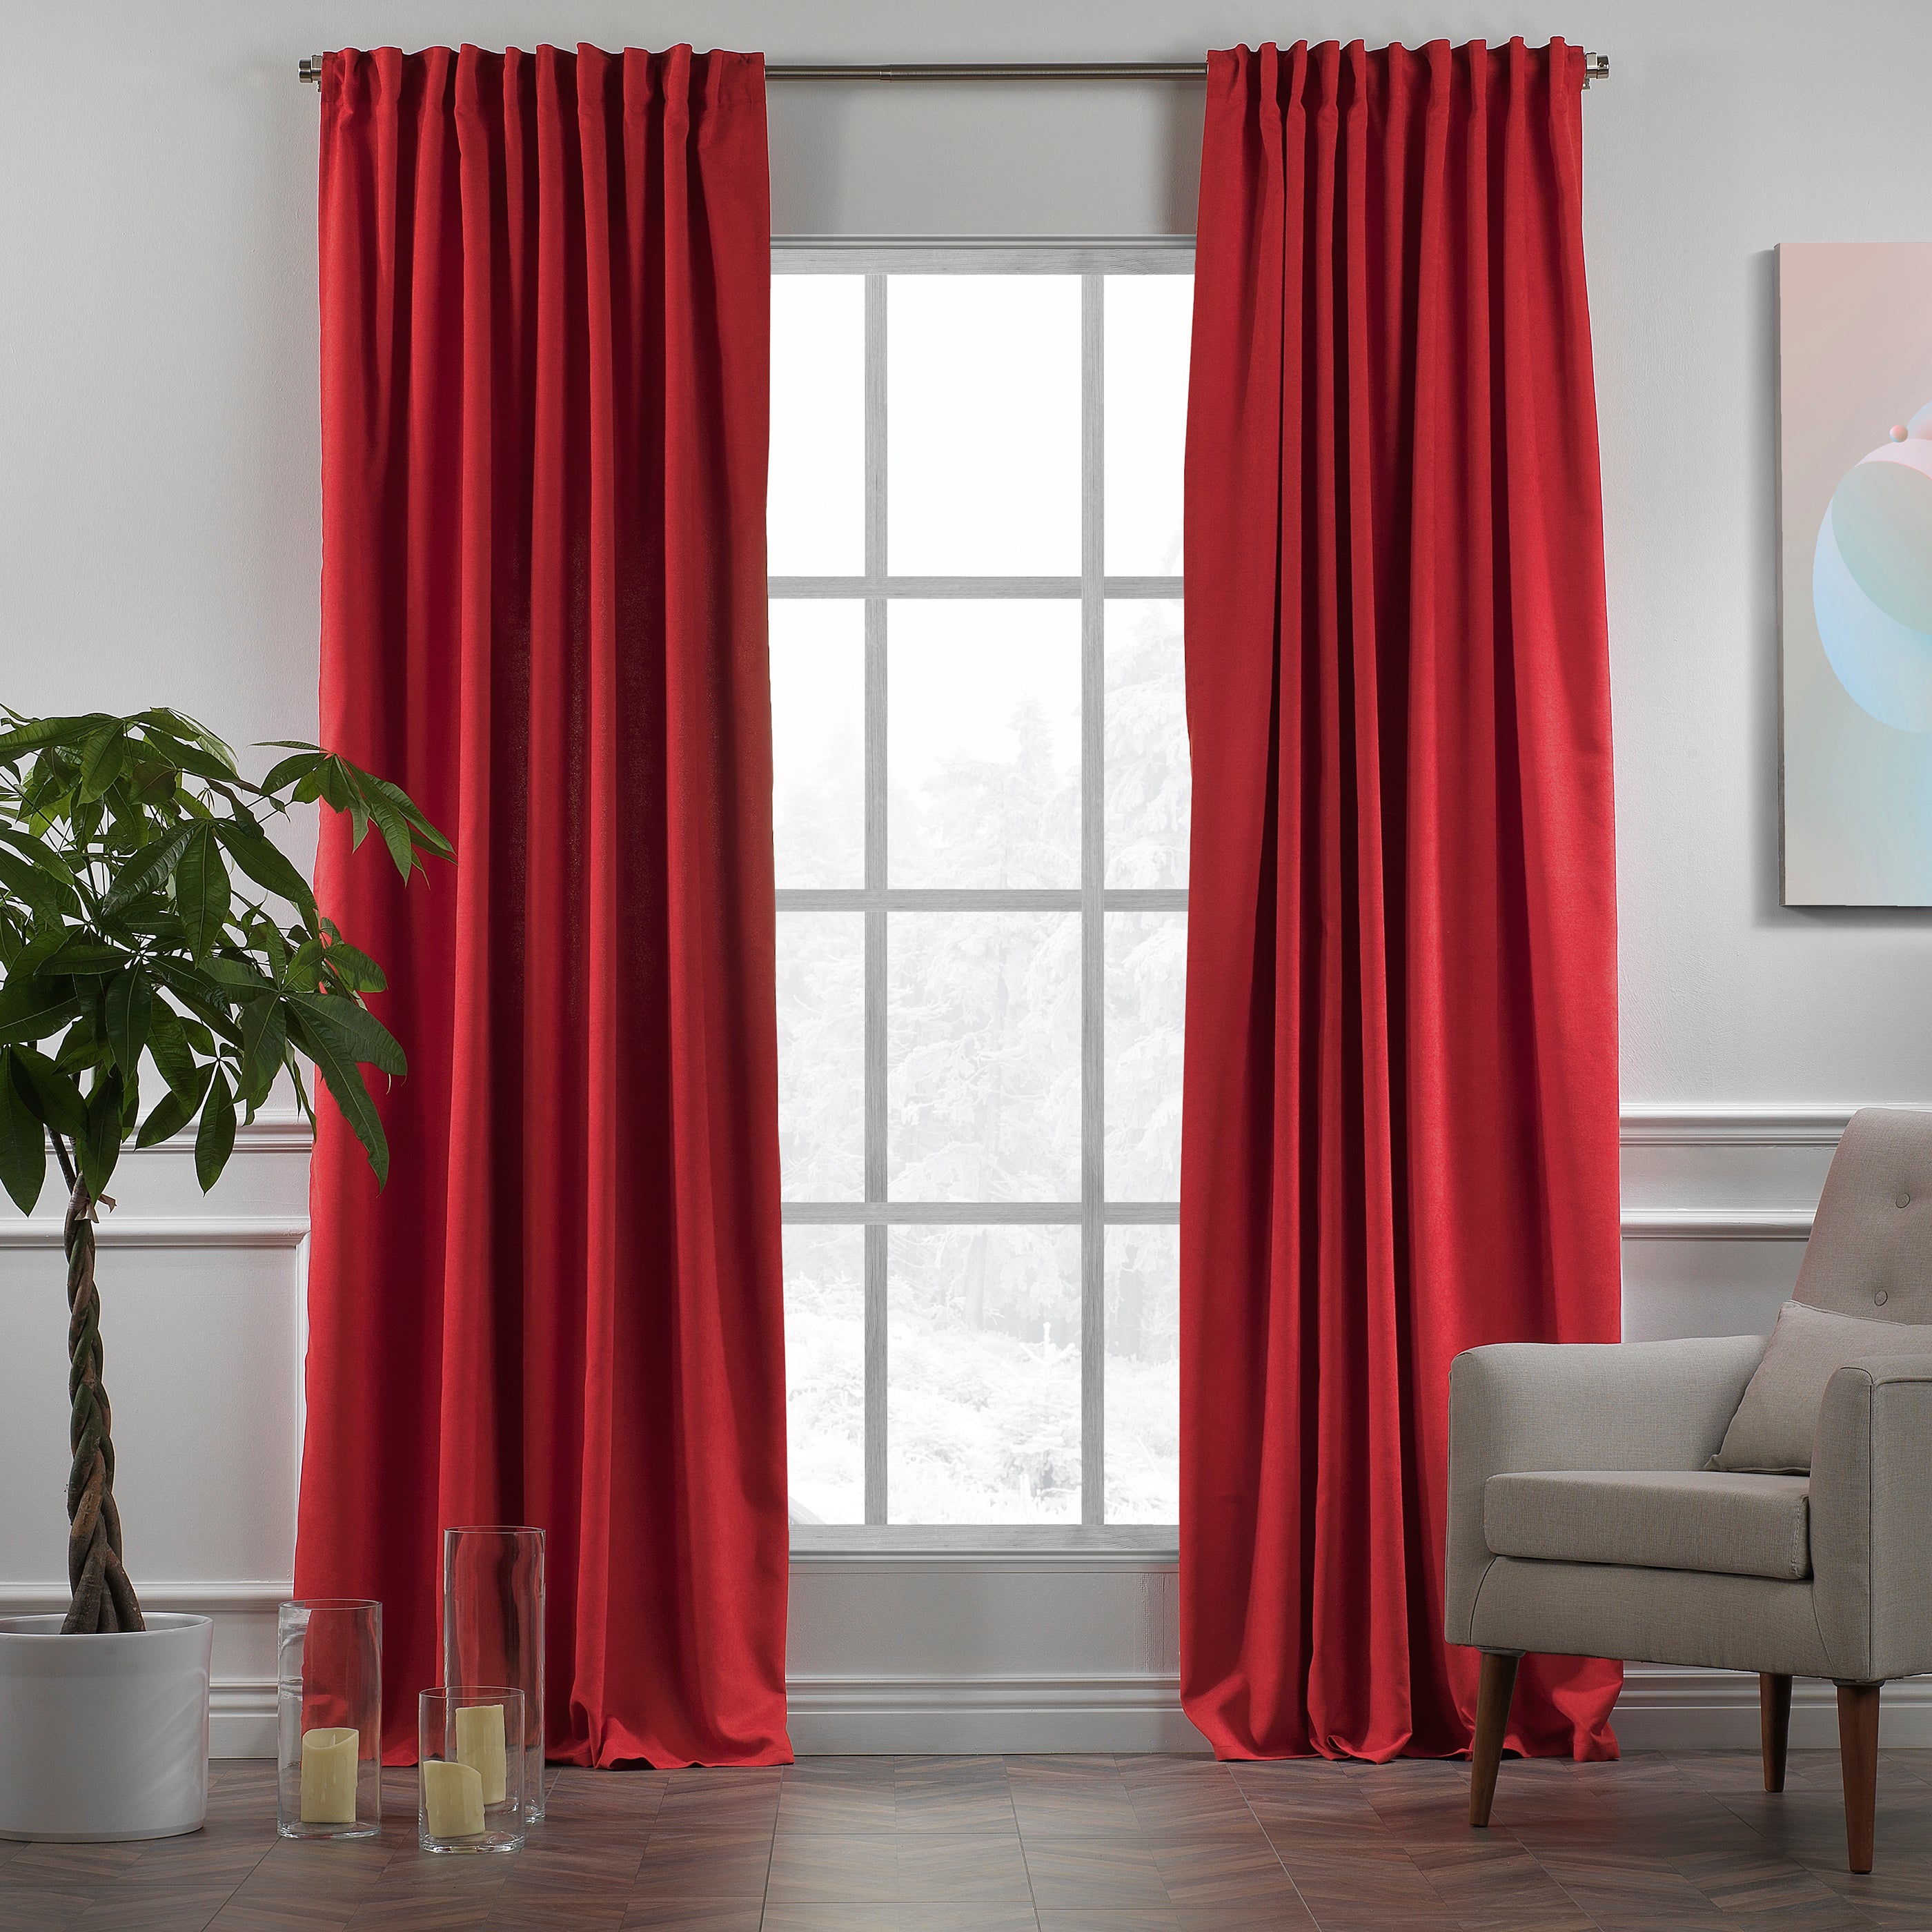 Solid Color Curtains Home Decorative Set of 2 Panels Velvet Look